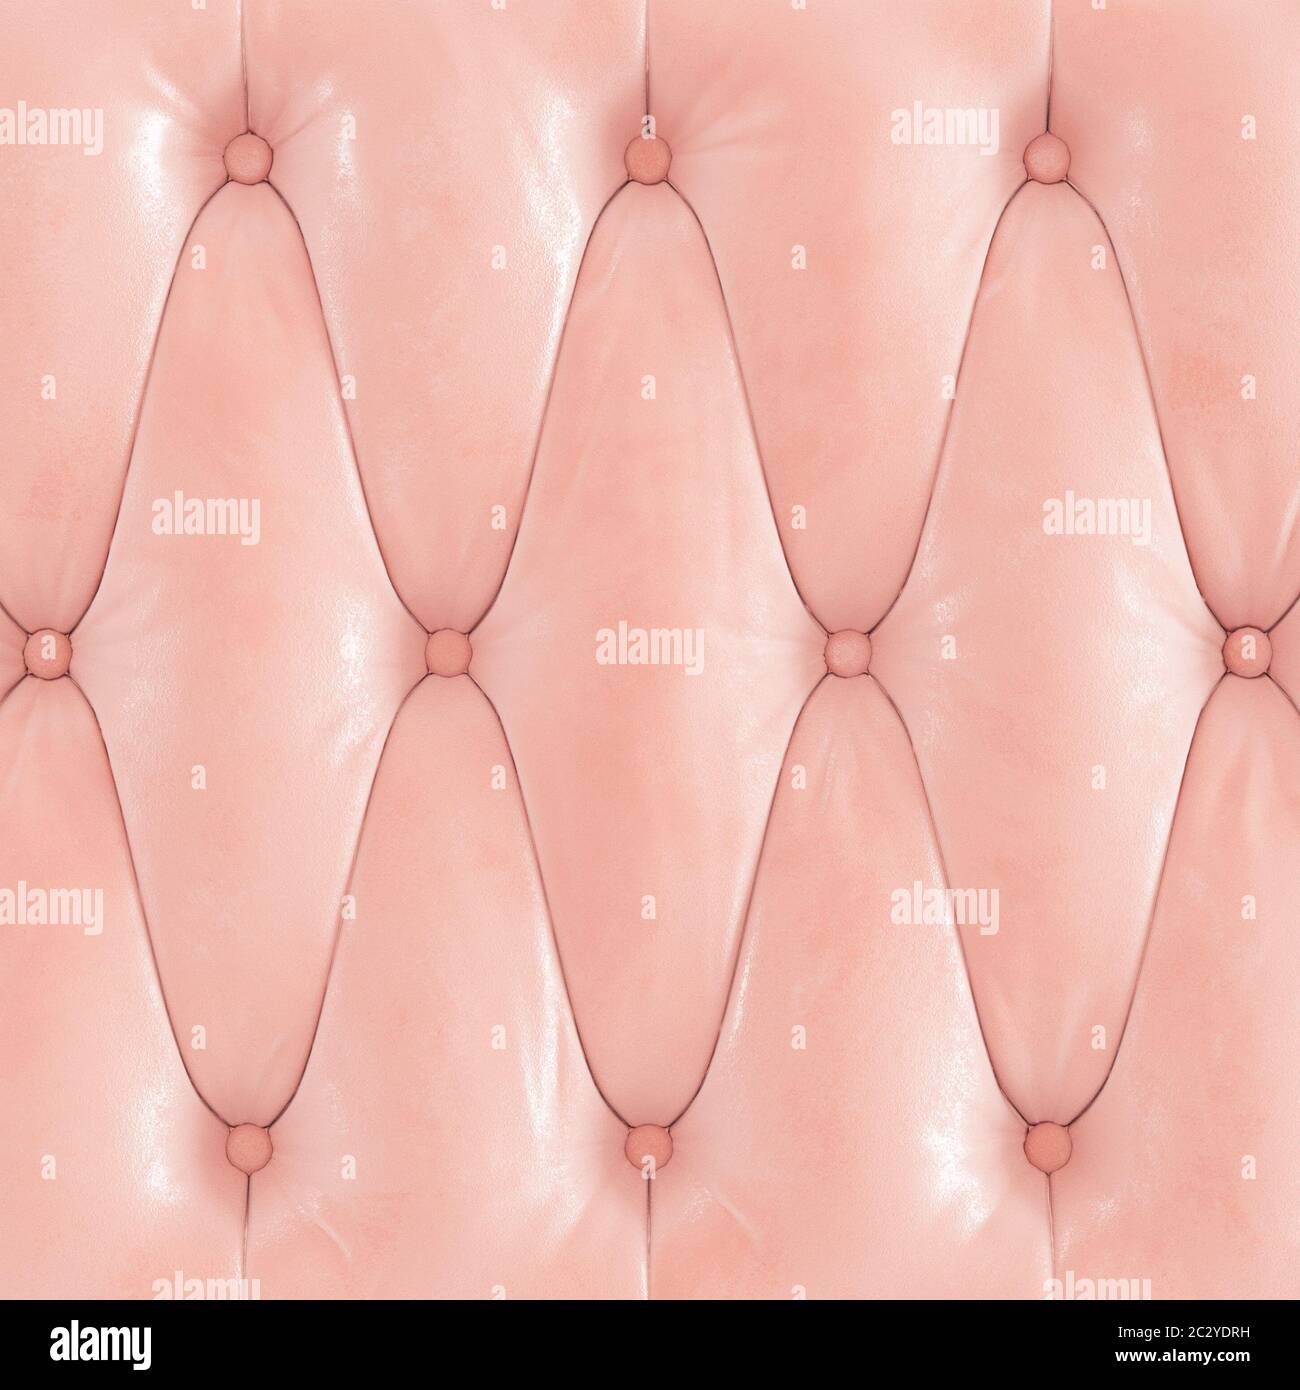 15,370 Light Pink Leather Images, Stock Photos, 3D objects